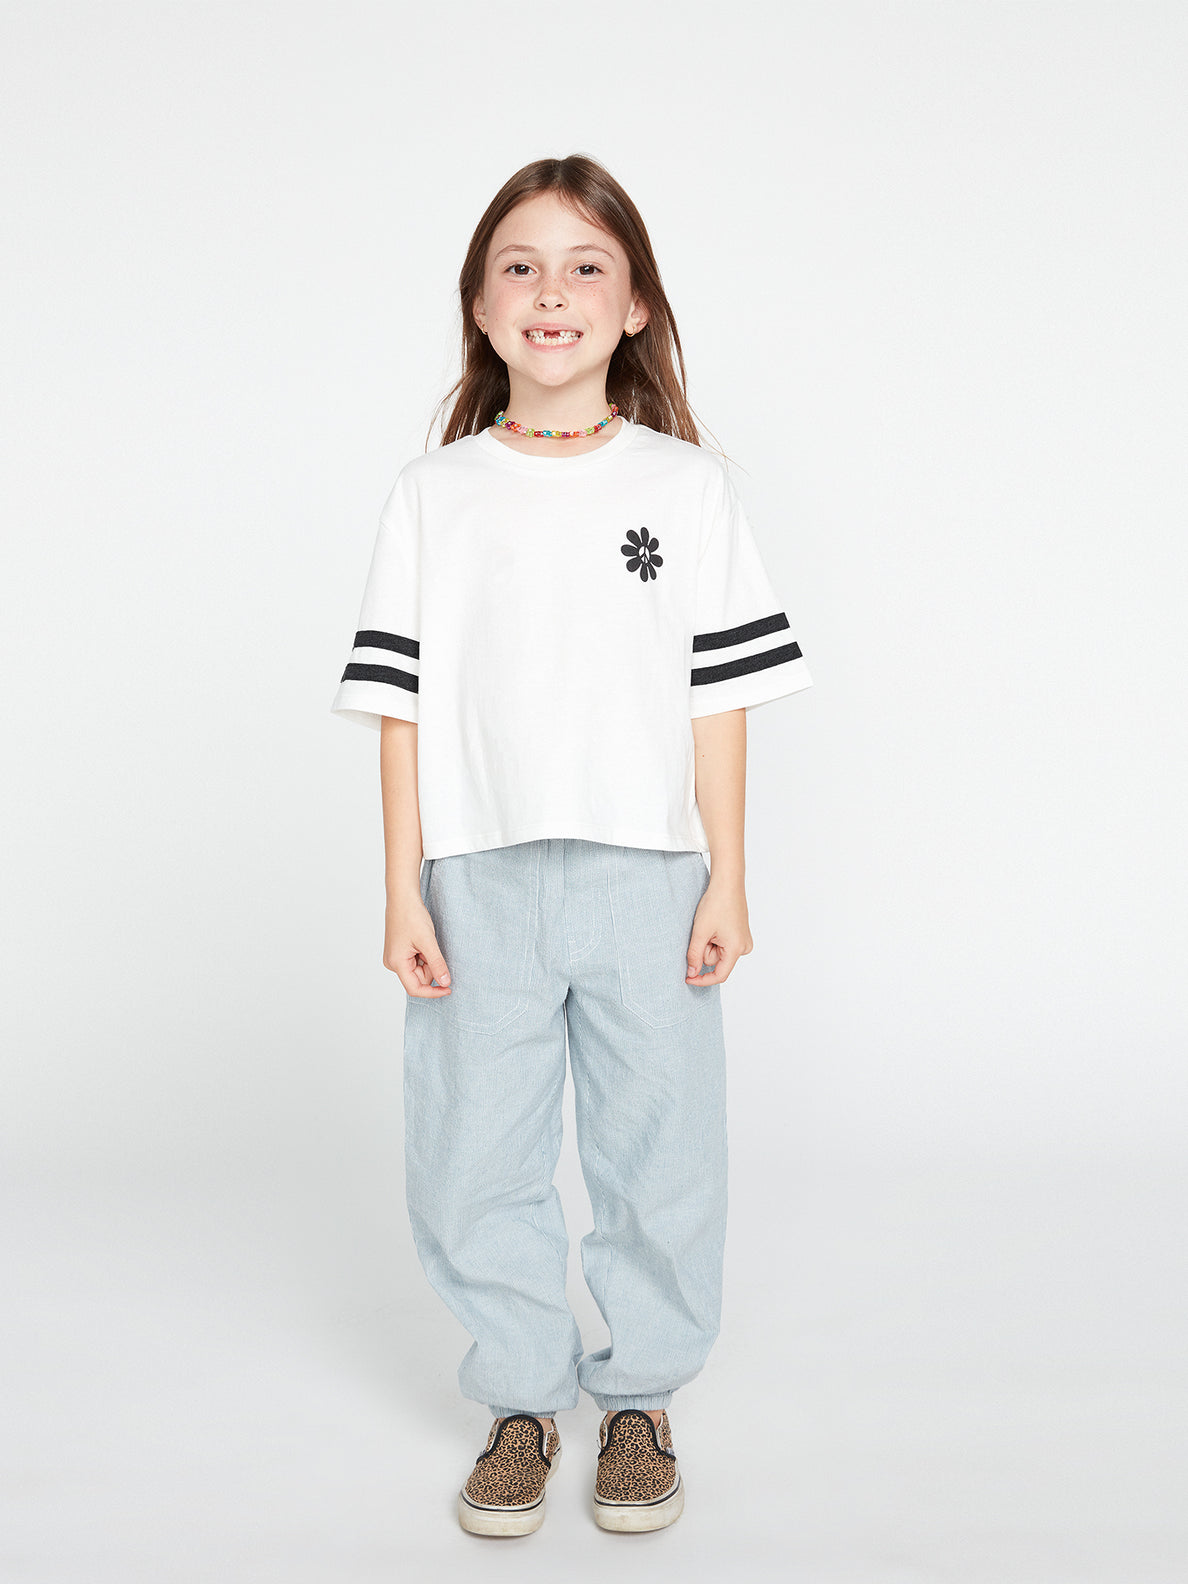 Girls Truly Stoked Short Sleeve Tee - Star White (R3532201_SWH) [F]